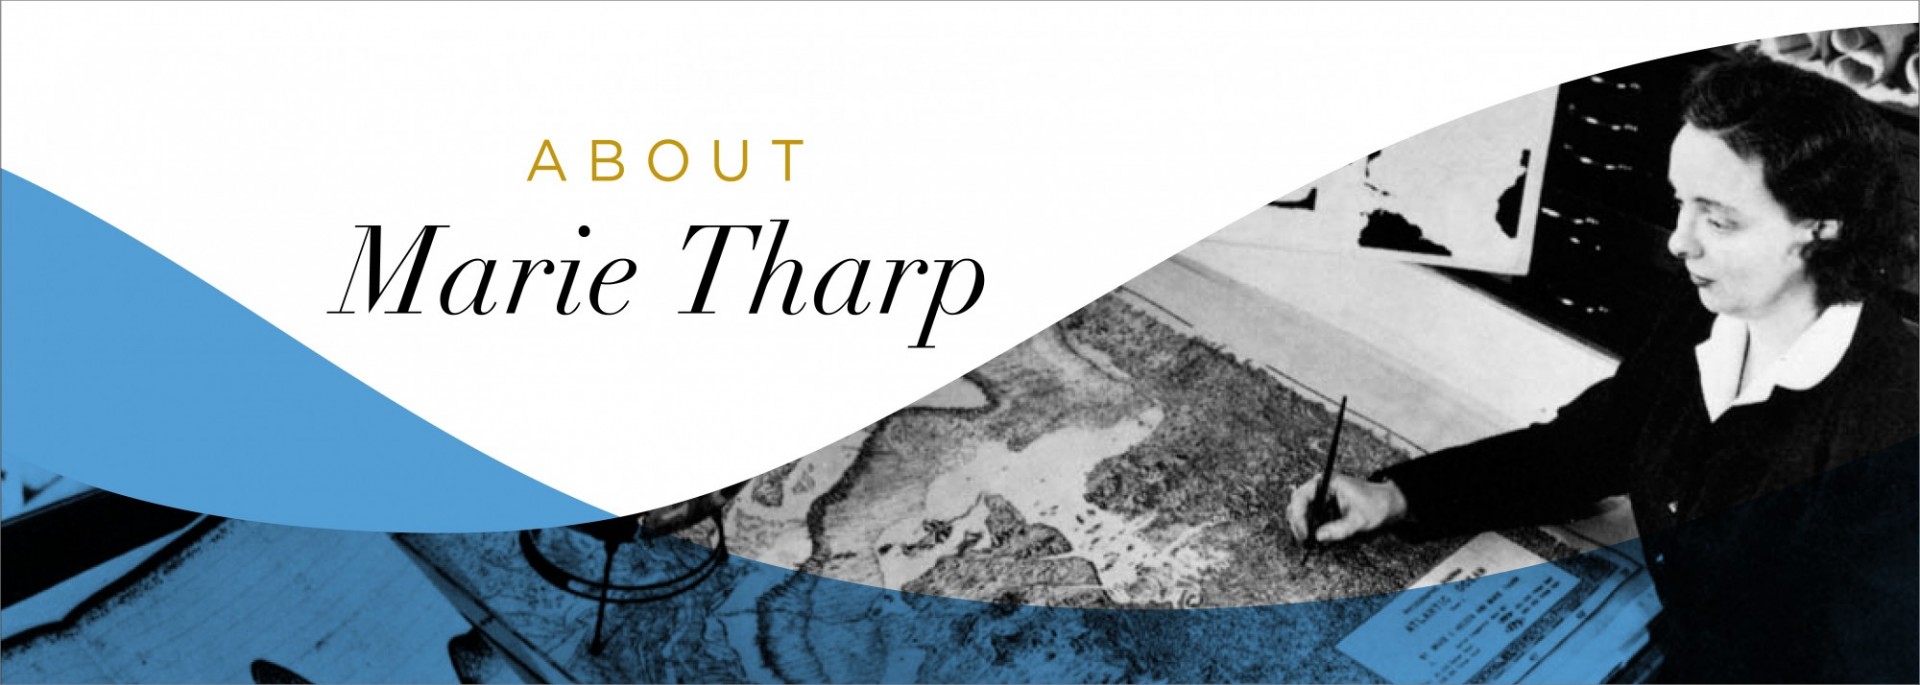 About Marie Tharp